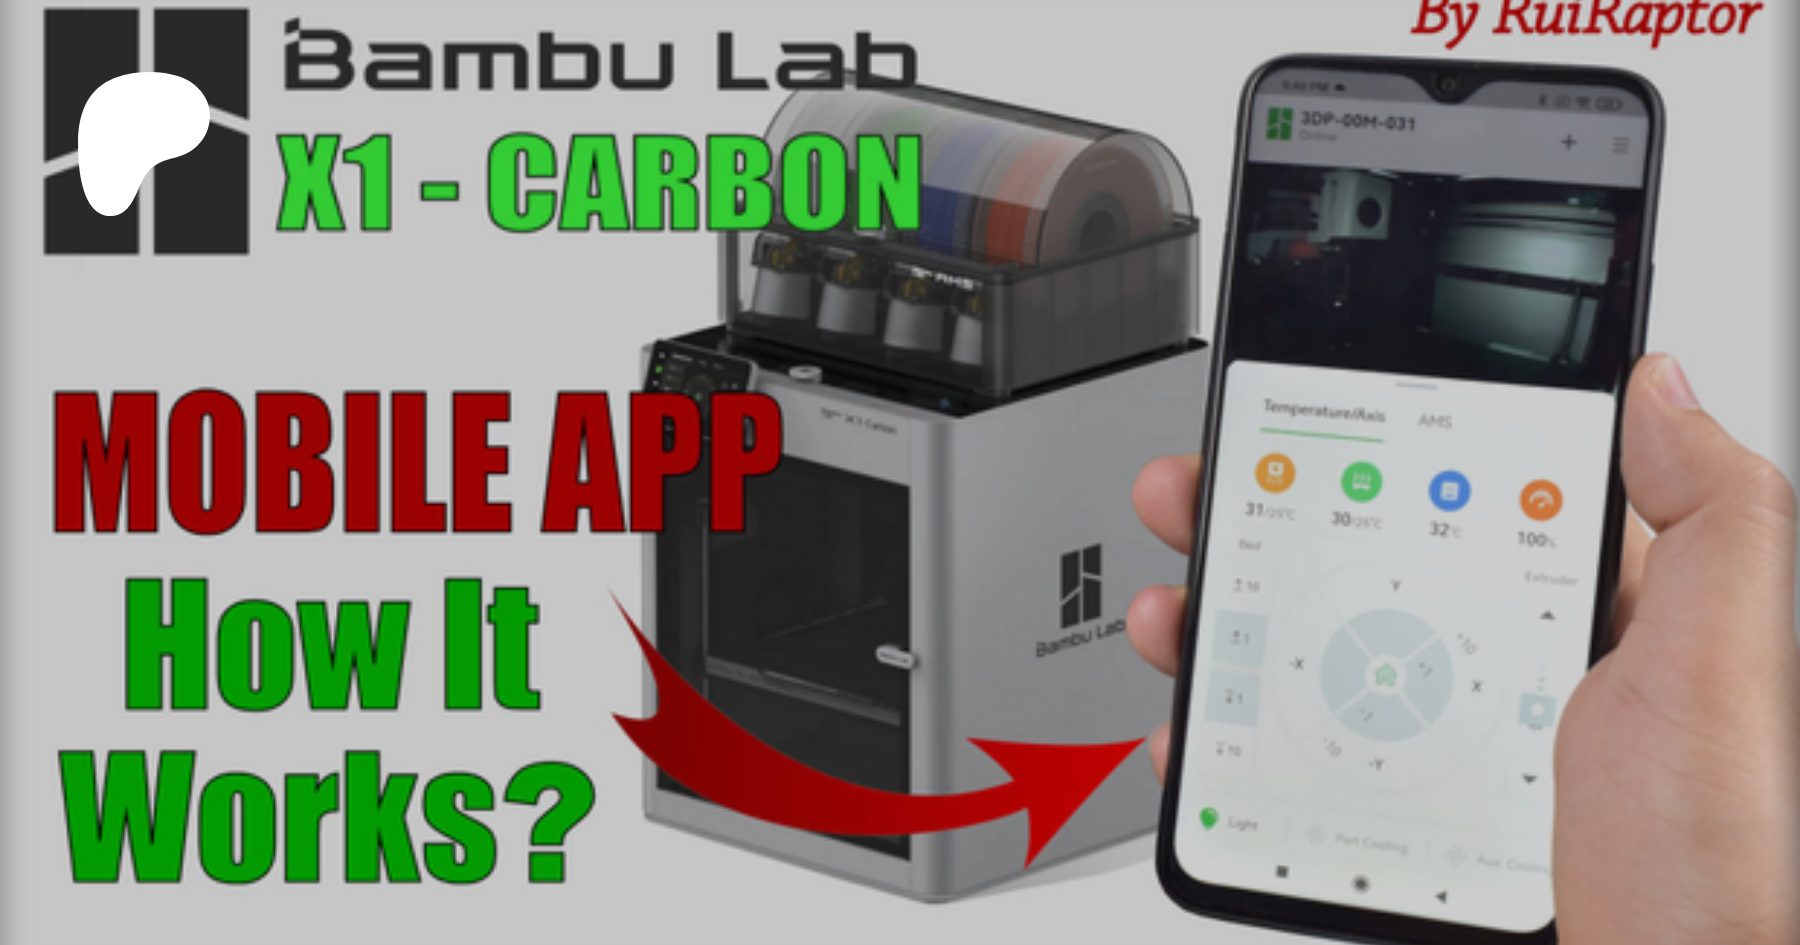 BAMBU HANDY - MOBILE APP To Control & Monitor The BAMBU LAB X1 / X1 CARBON  - All The Details